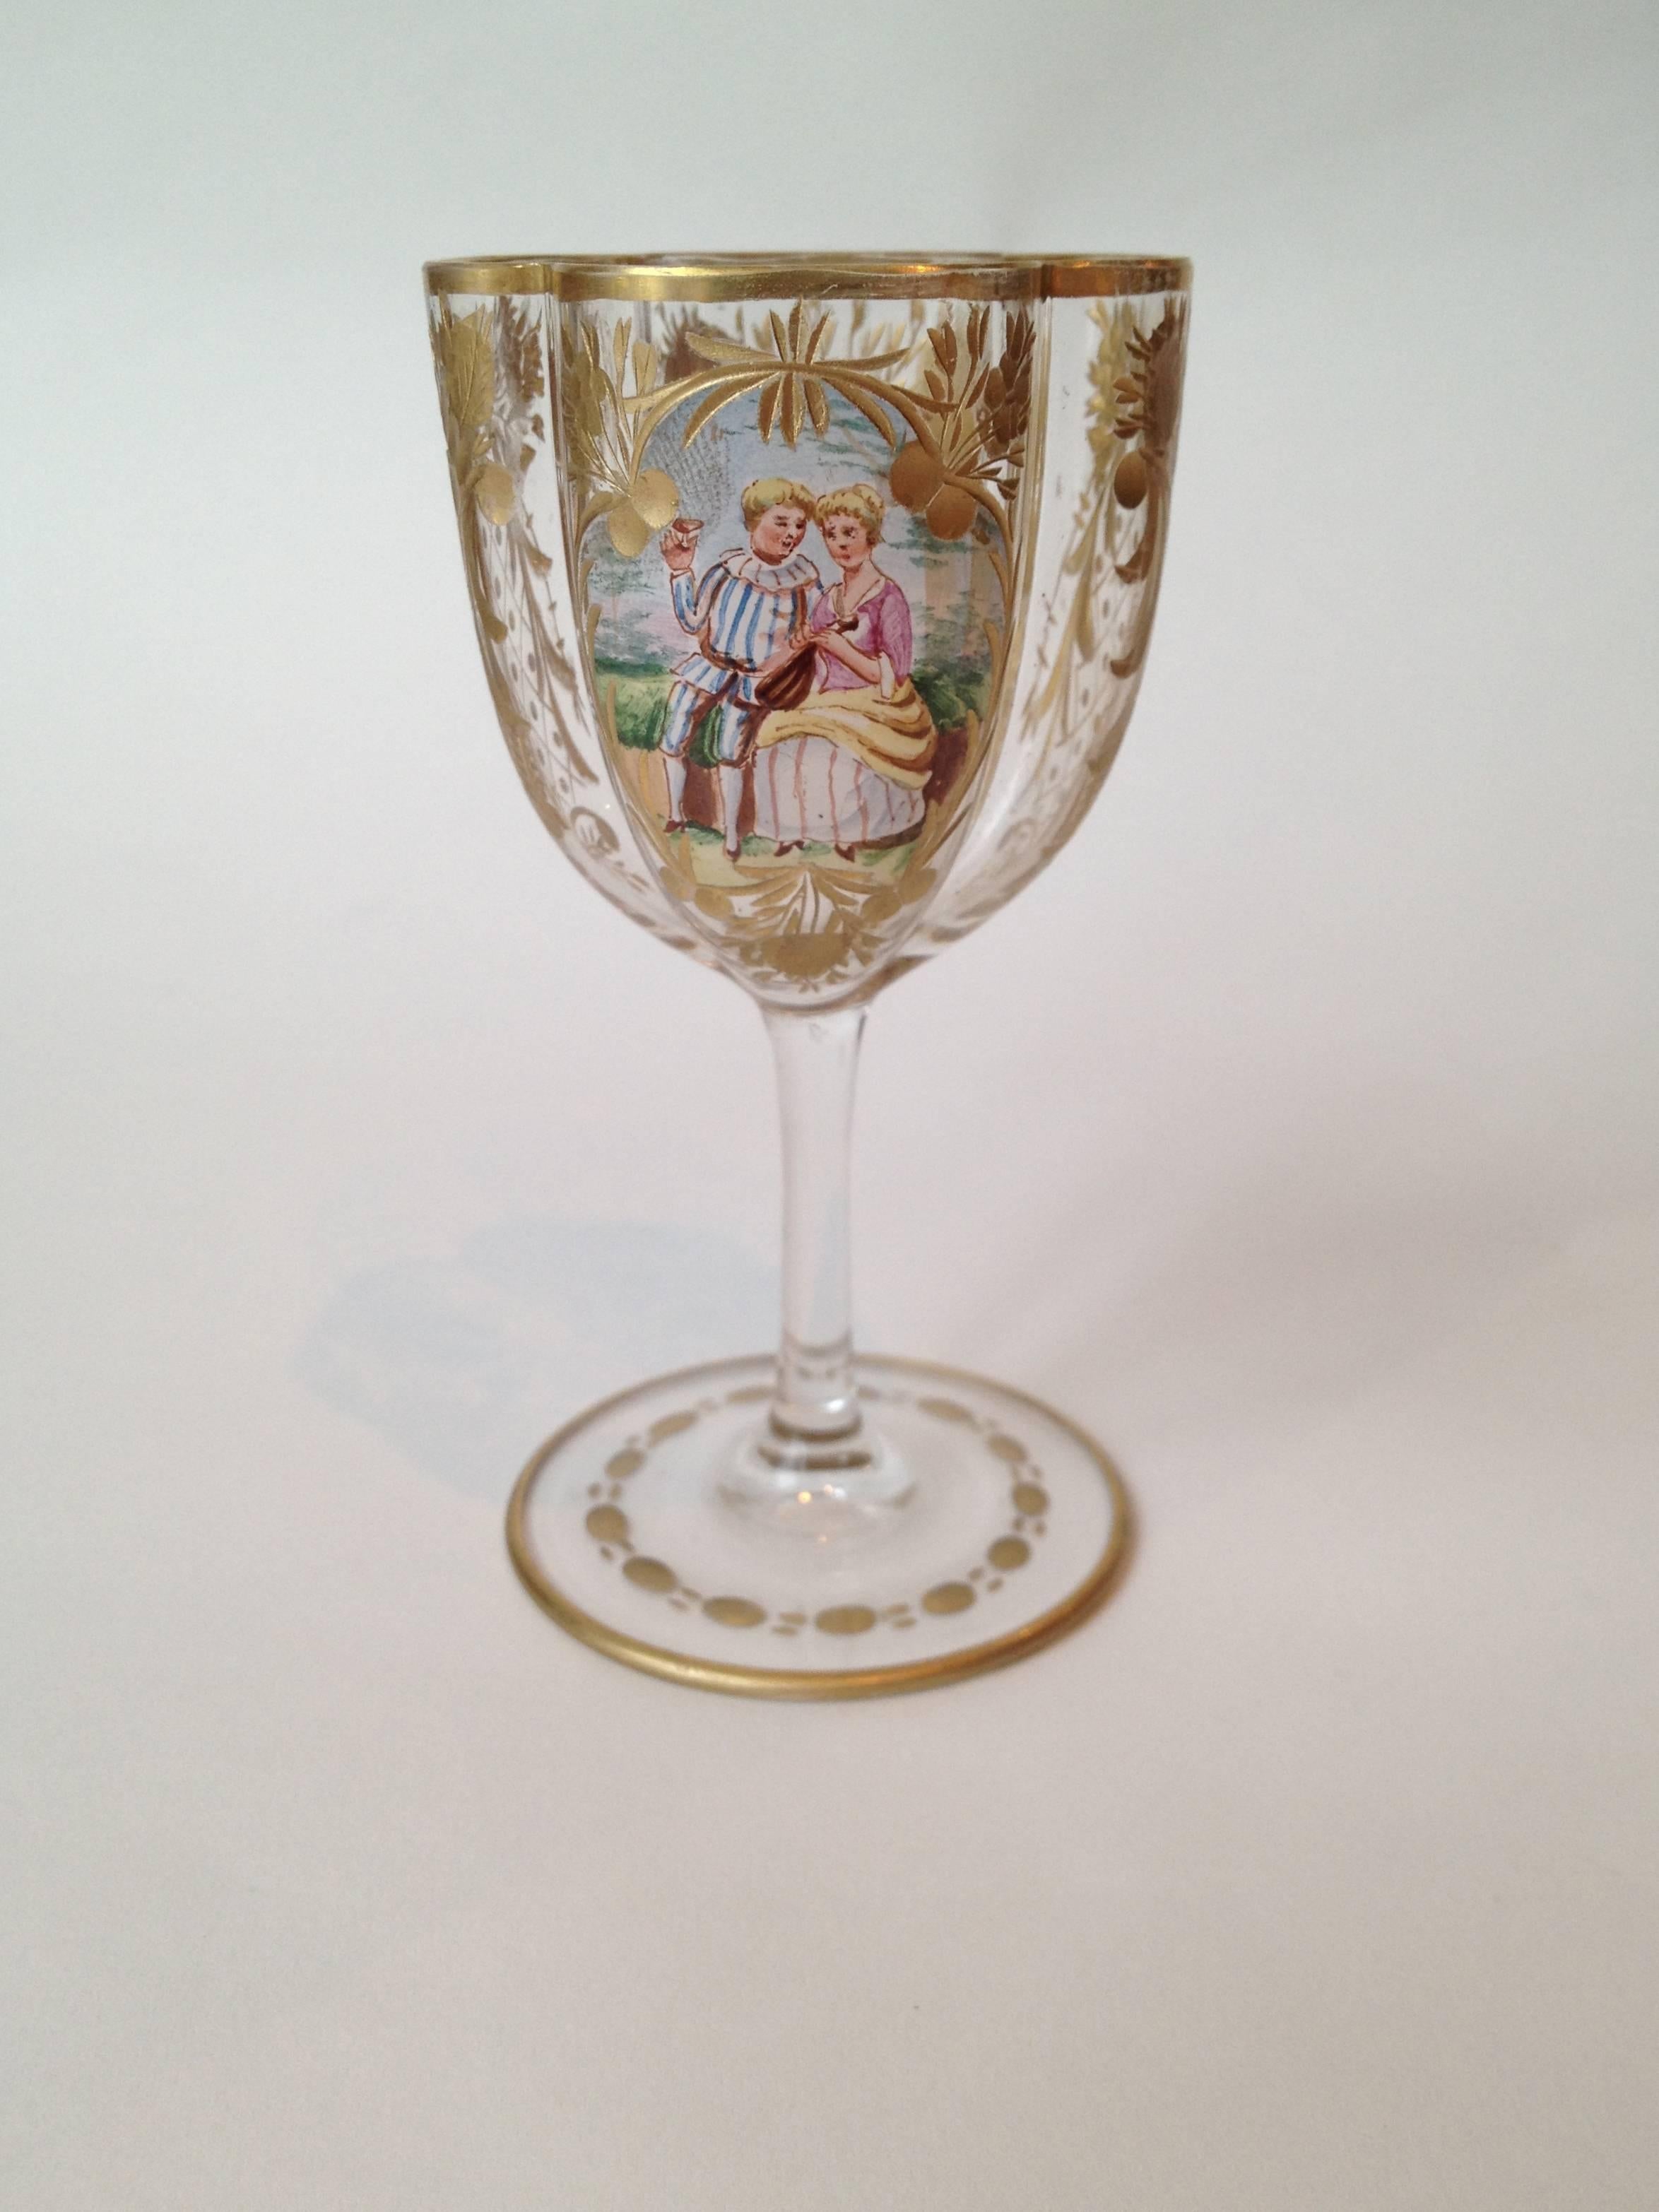 The most complete set we have ever seen so many shapes and sizes, for 12
with eight pieces per place setting. The scenes hand-painted enamel expertly
done, the etching and gilding fantastic with flowers and diapering, the glass blown out in a